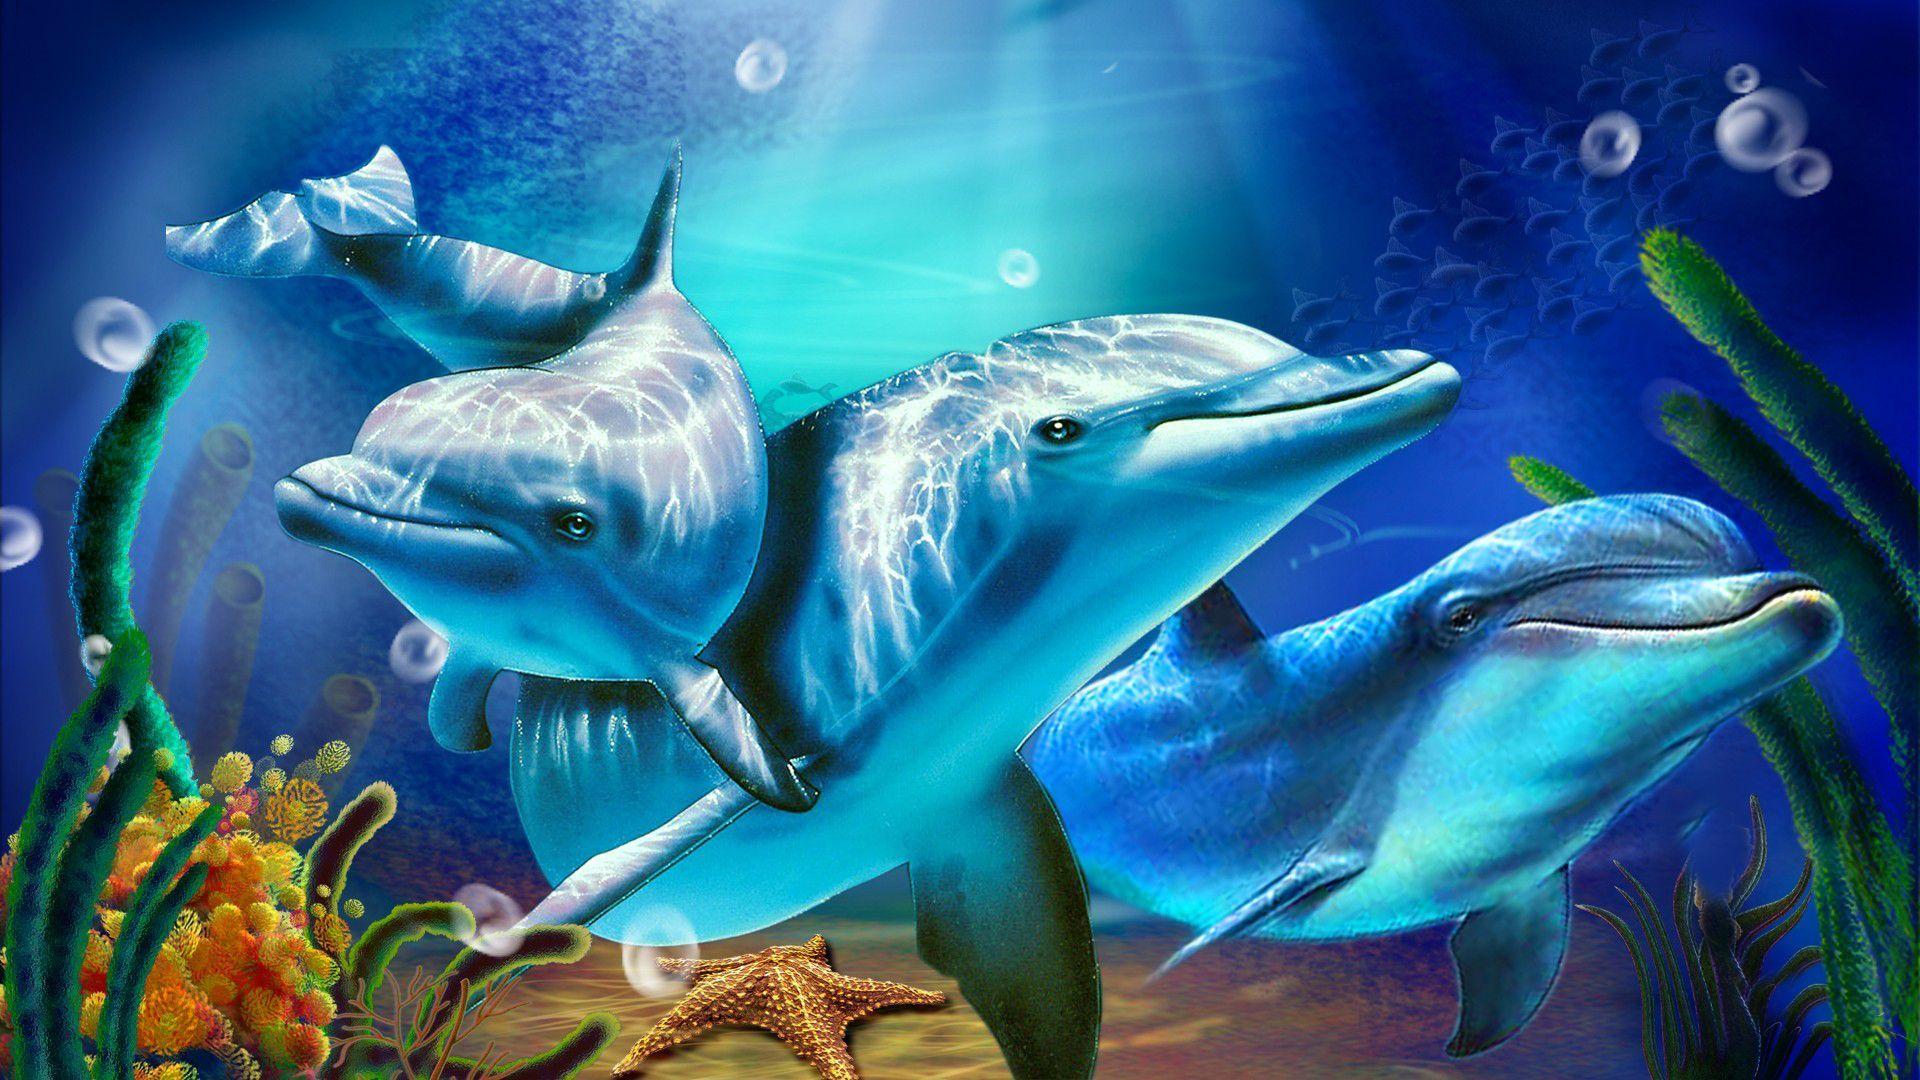 Dolphin Animated wallpaper, Find best latest Dolphin Animated